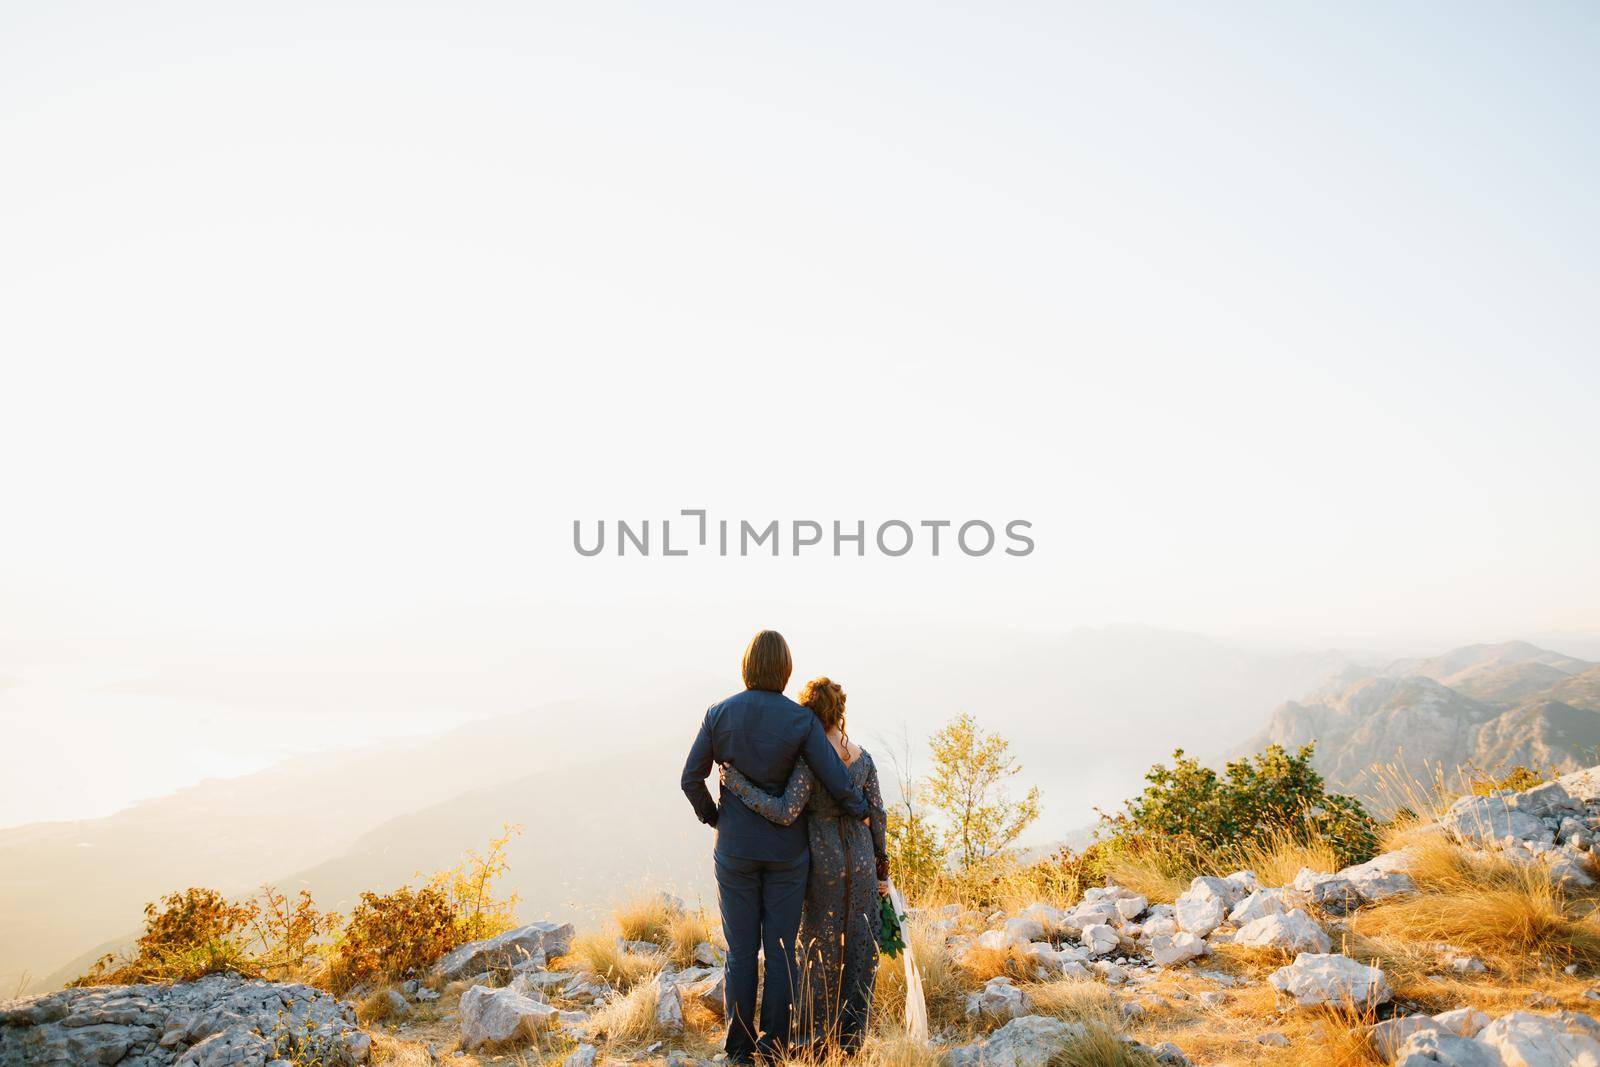 The bride and groom embracing on the Lovcen mountain behind them opens a view of the Bay of Kotor, back view by Nadtochiy